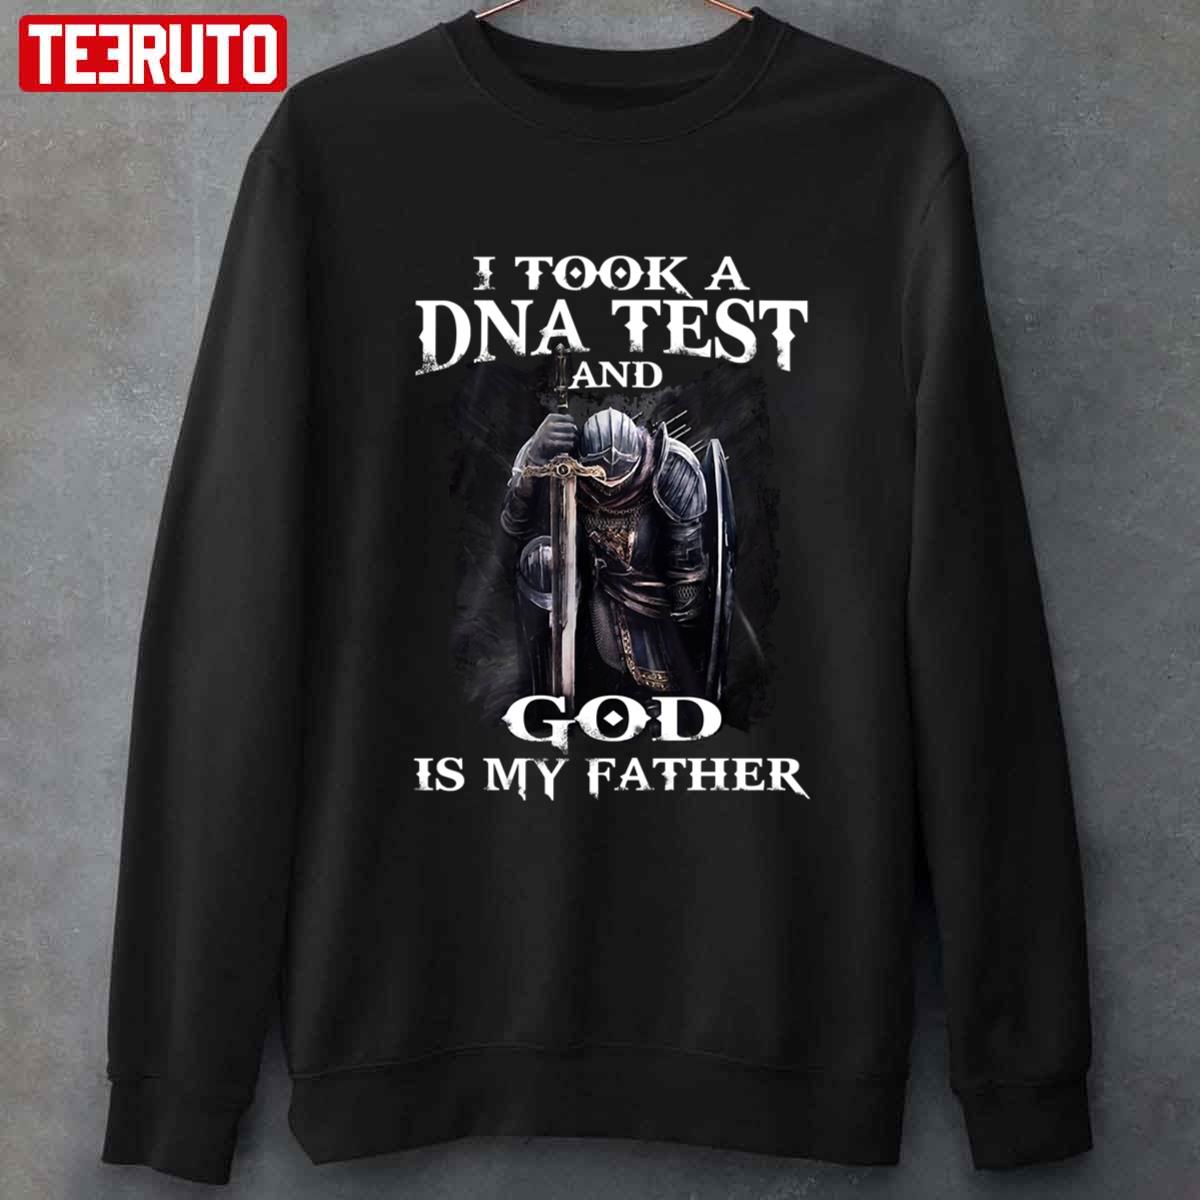 I Took A DNA Test And God Is My Father Christian Warrior Unisex T-Shirt Sweatshirt